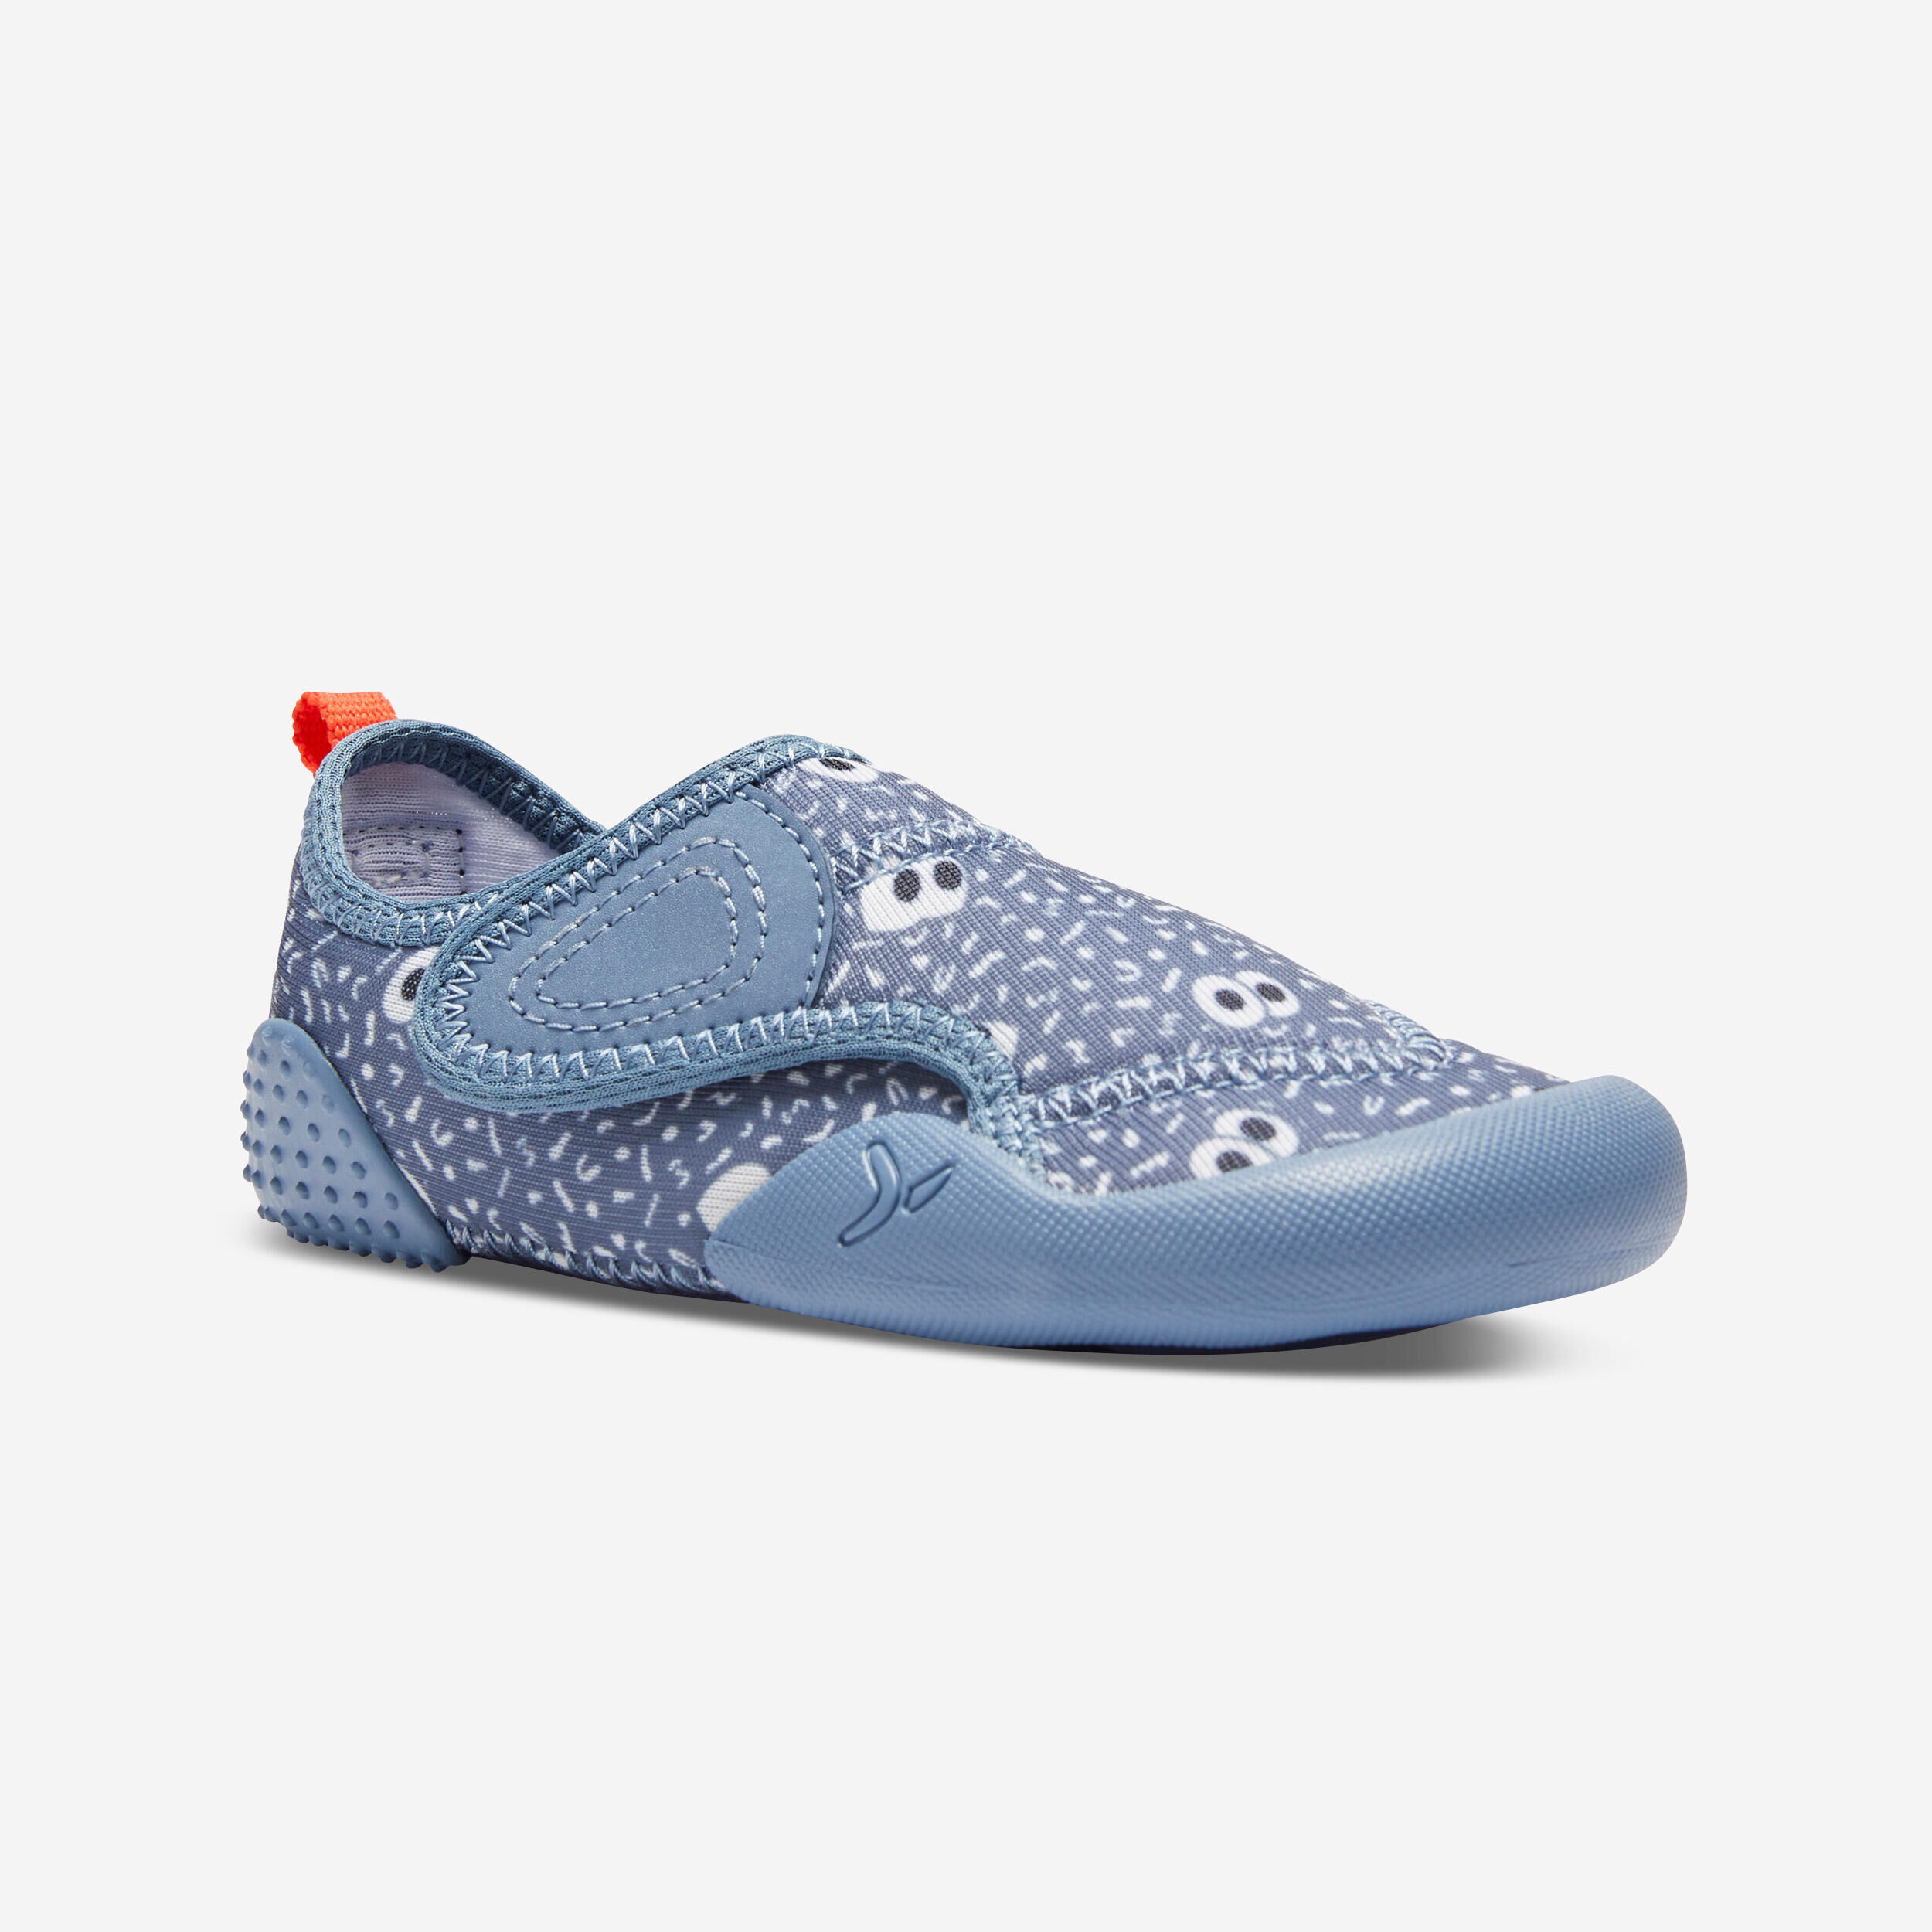 DOMYOS Kids' Non-Slip and Breathable Bootee - Patterns